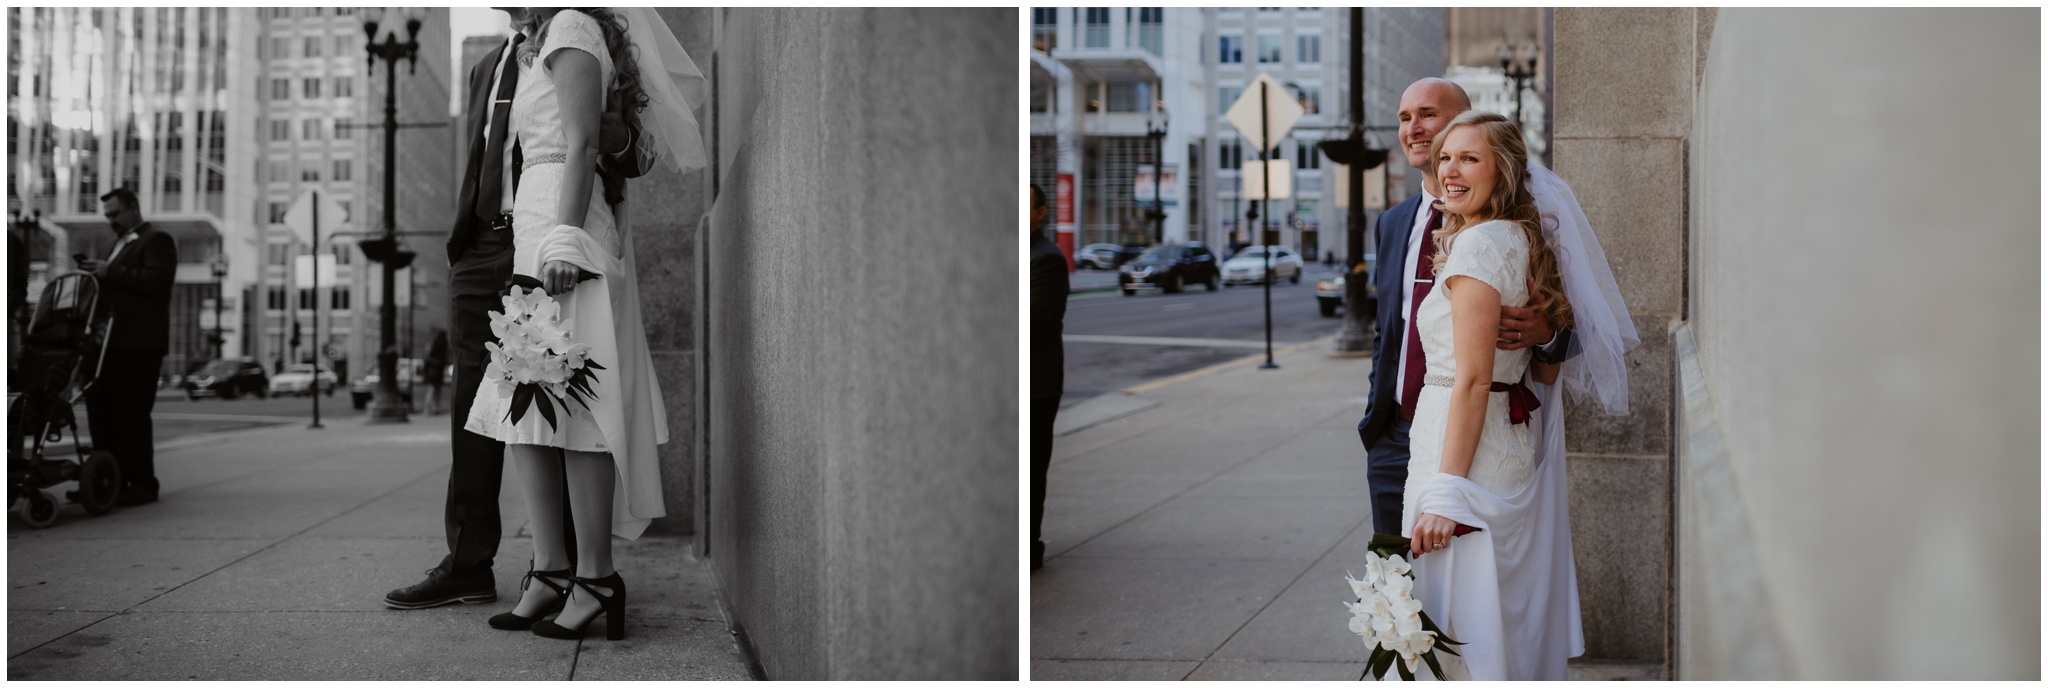 The Morros Chicago Wedding Photography Olga and Jeff Downtown Chicago City Hall Elopement_0043.jpg